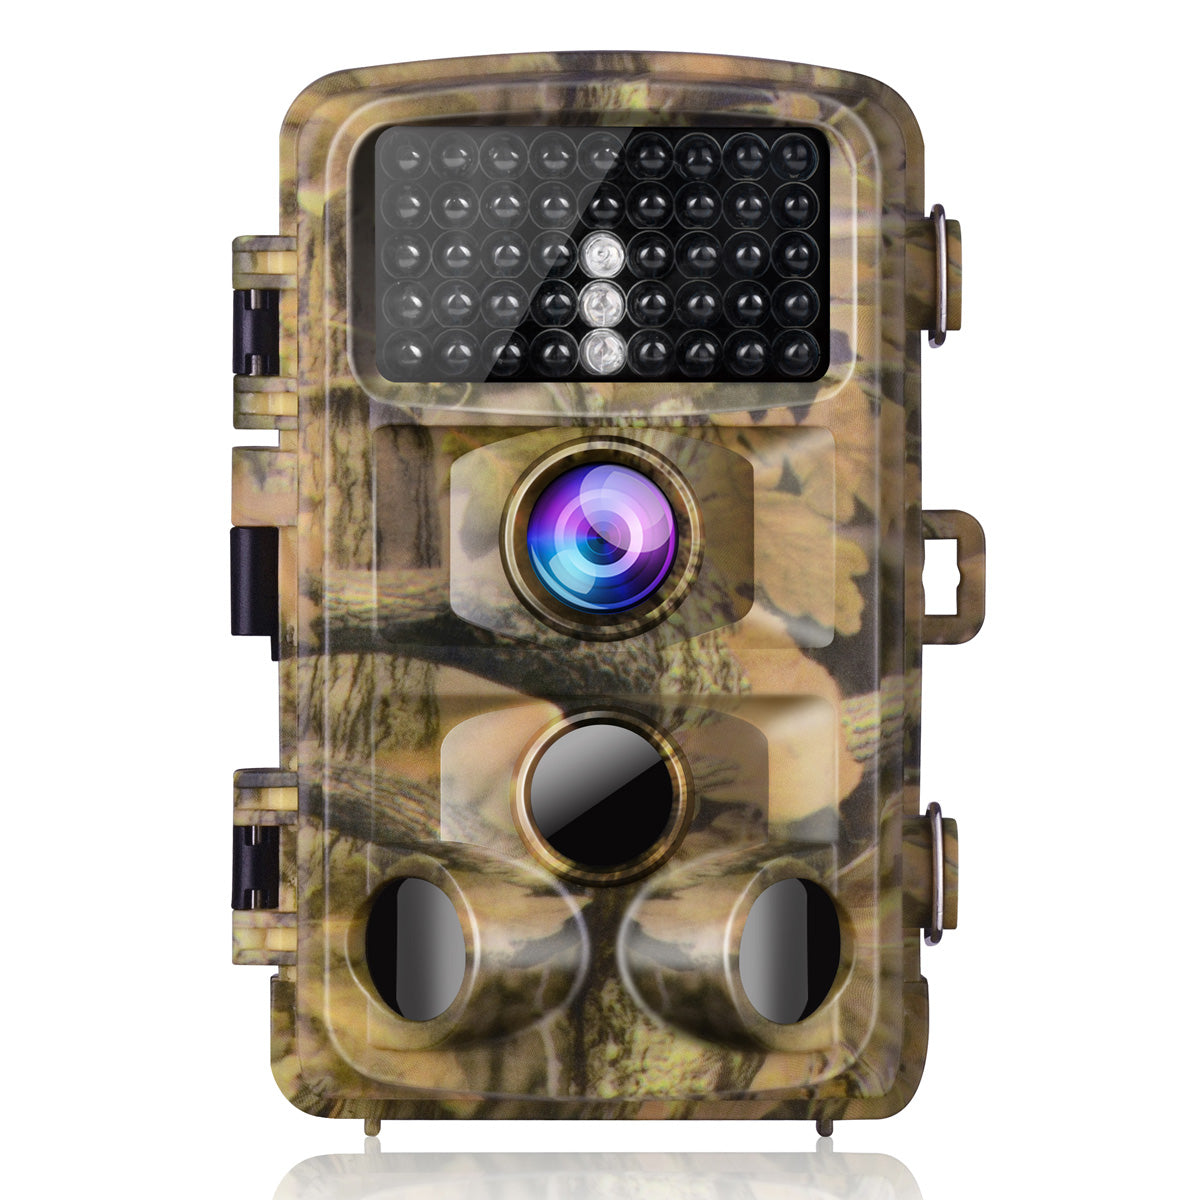 Campark T45 16MP 1080P Trail Camera With Infrared Night Vision（Only available in AU, EU）